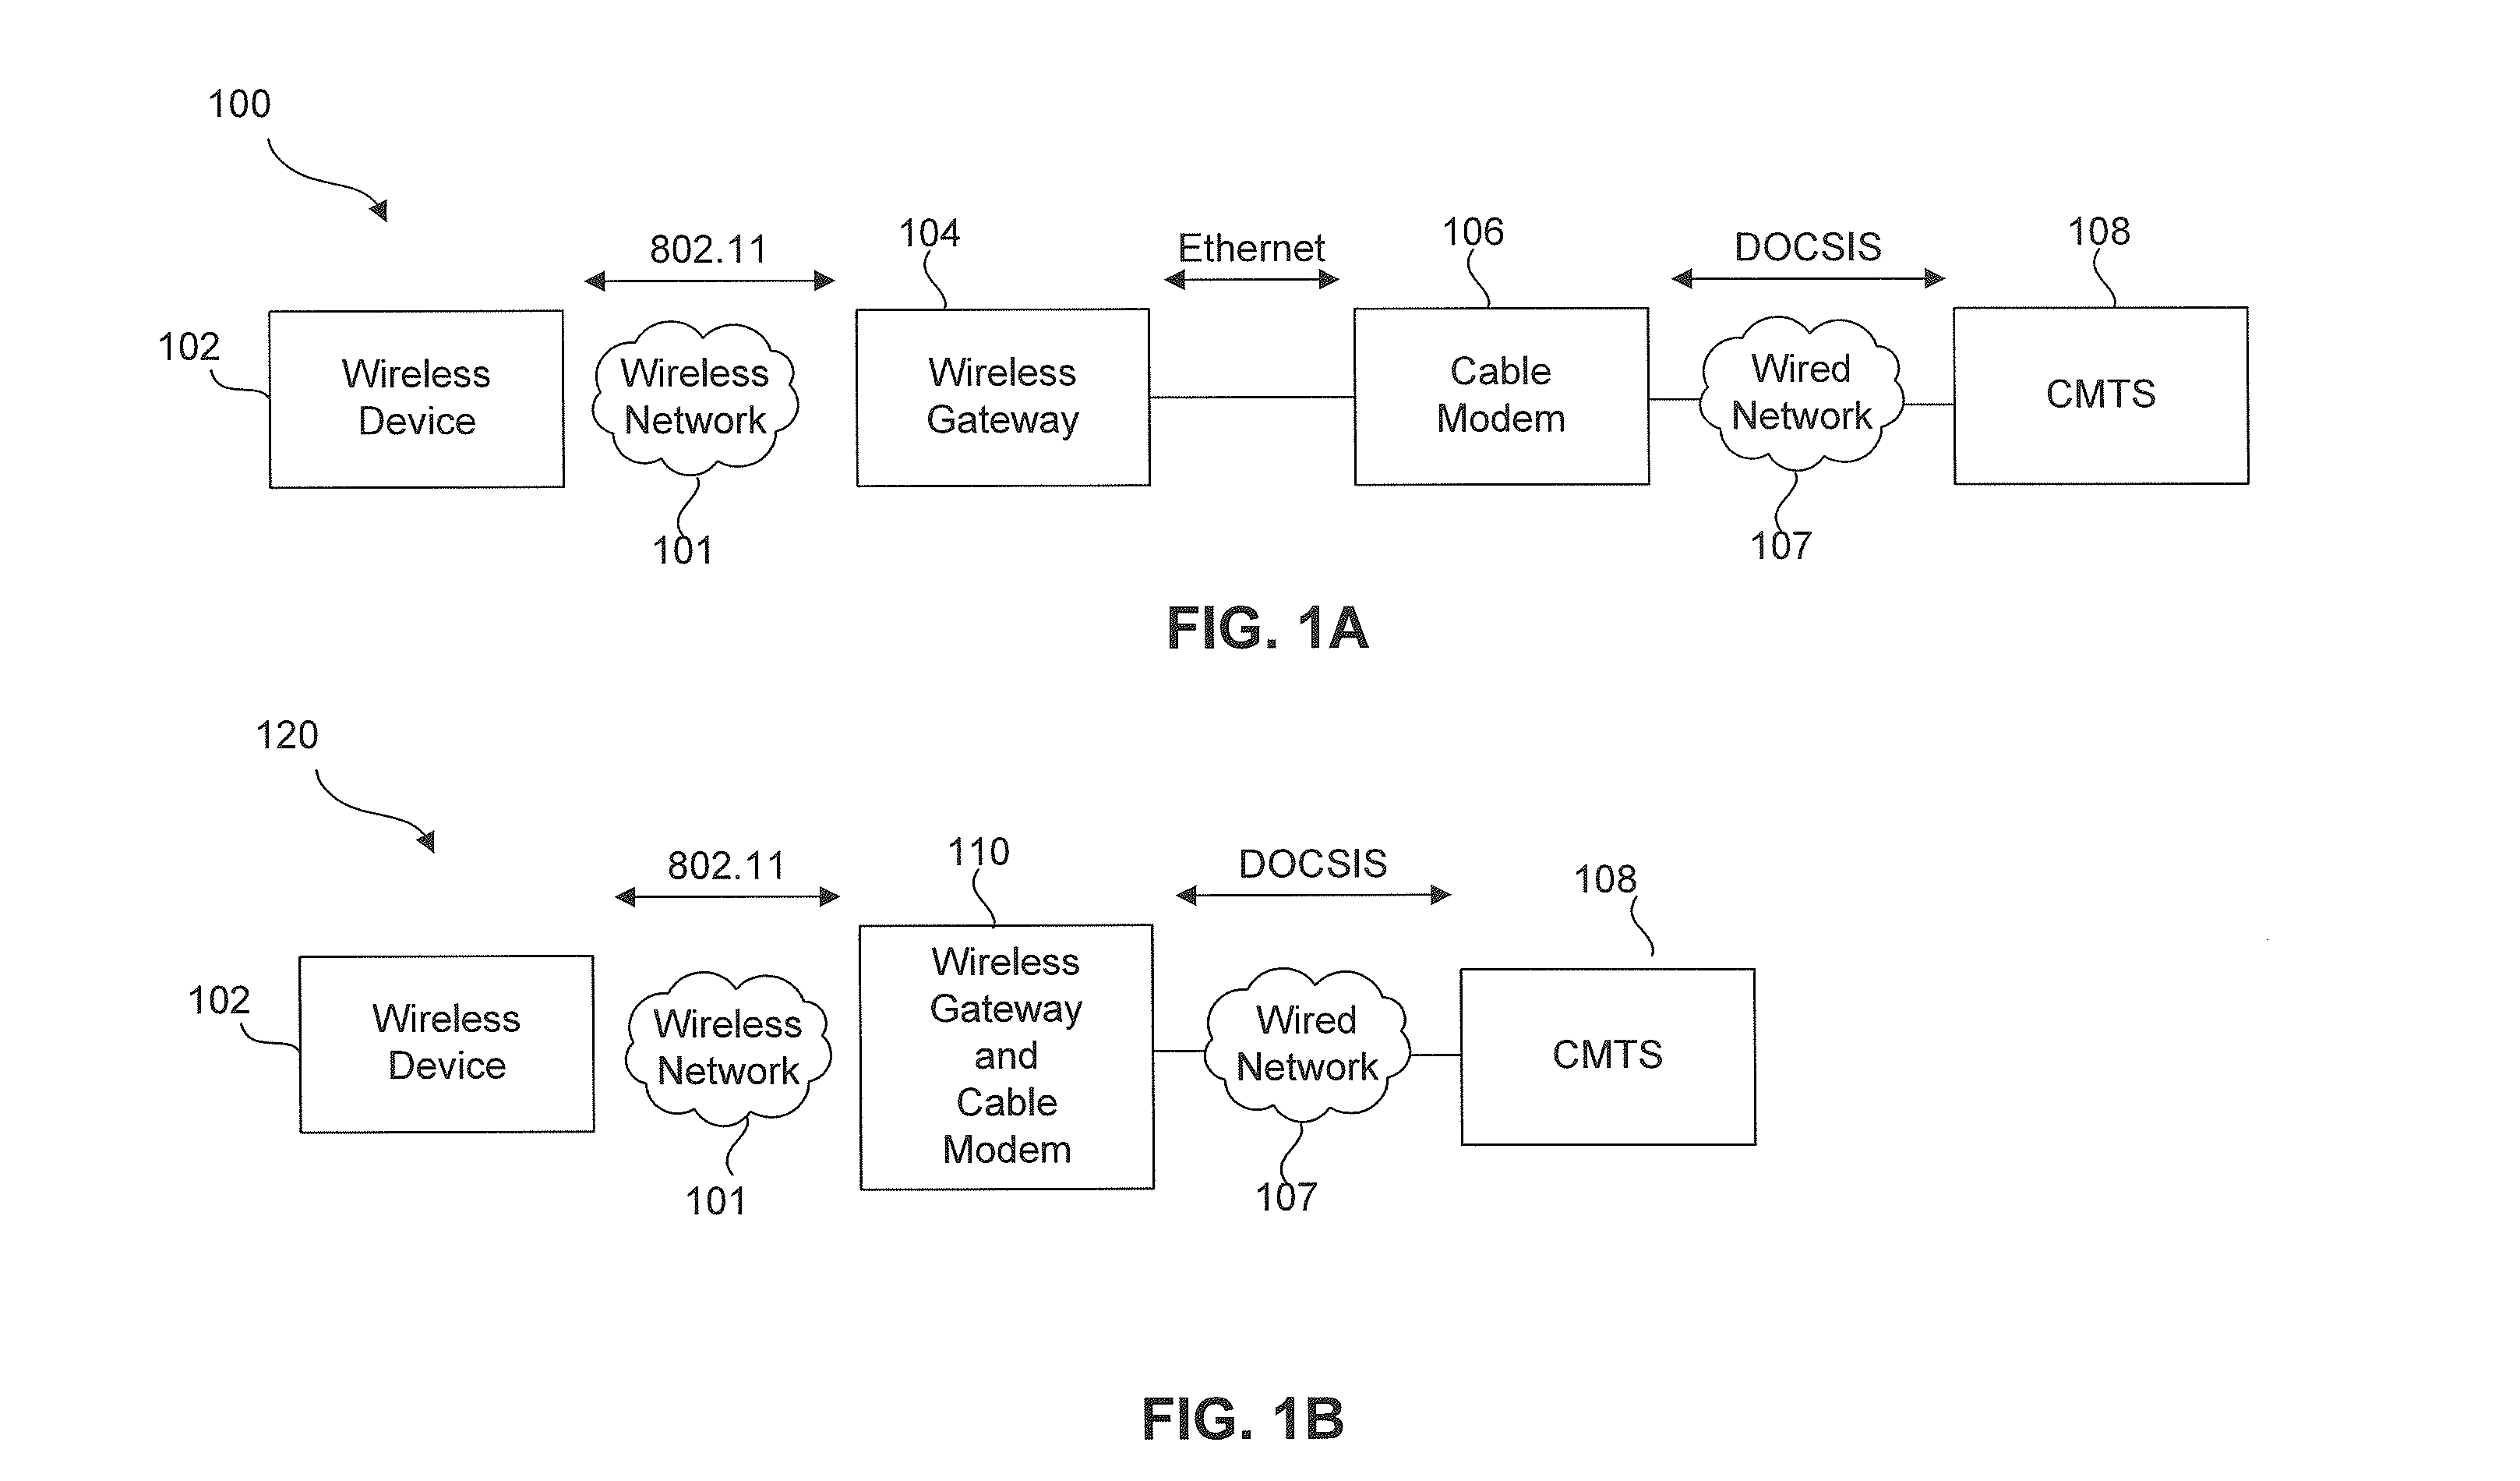 Methods quality of service (QOS) from a wireless network to a wired network